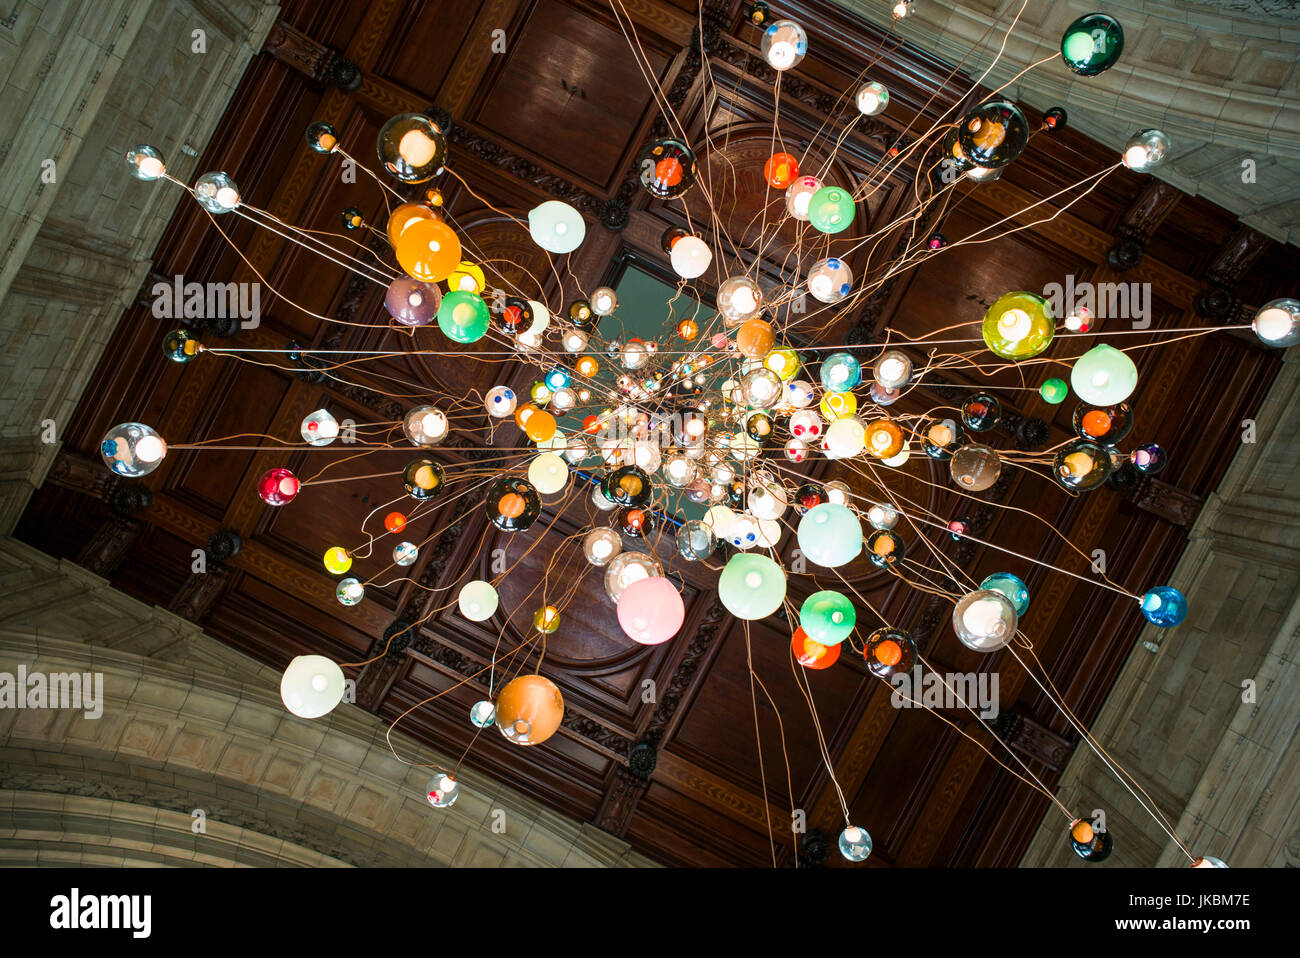 England, London, South Kensington, The Victoria and Albert Museum, main entrance ceiling glass sculpture by Dale Chihuly Stock Photo